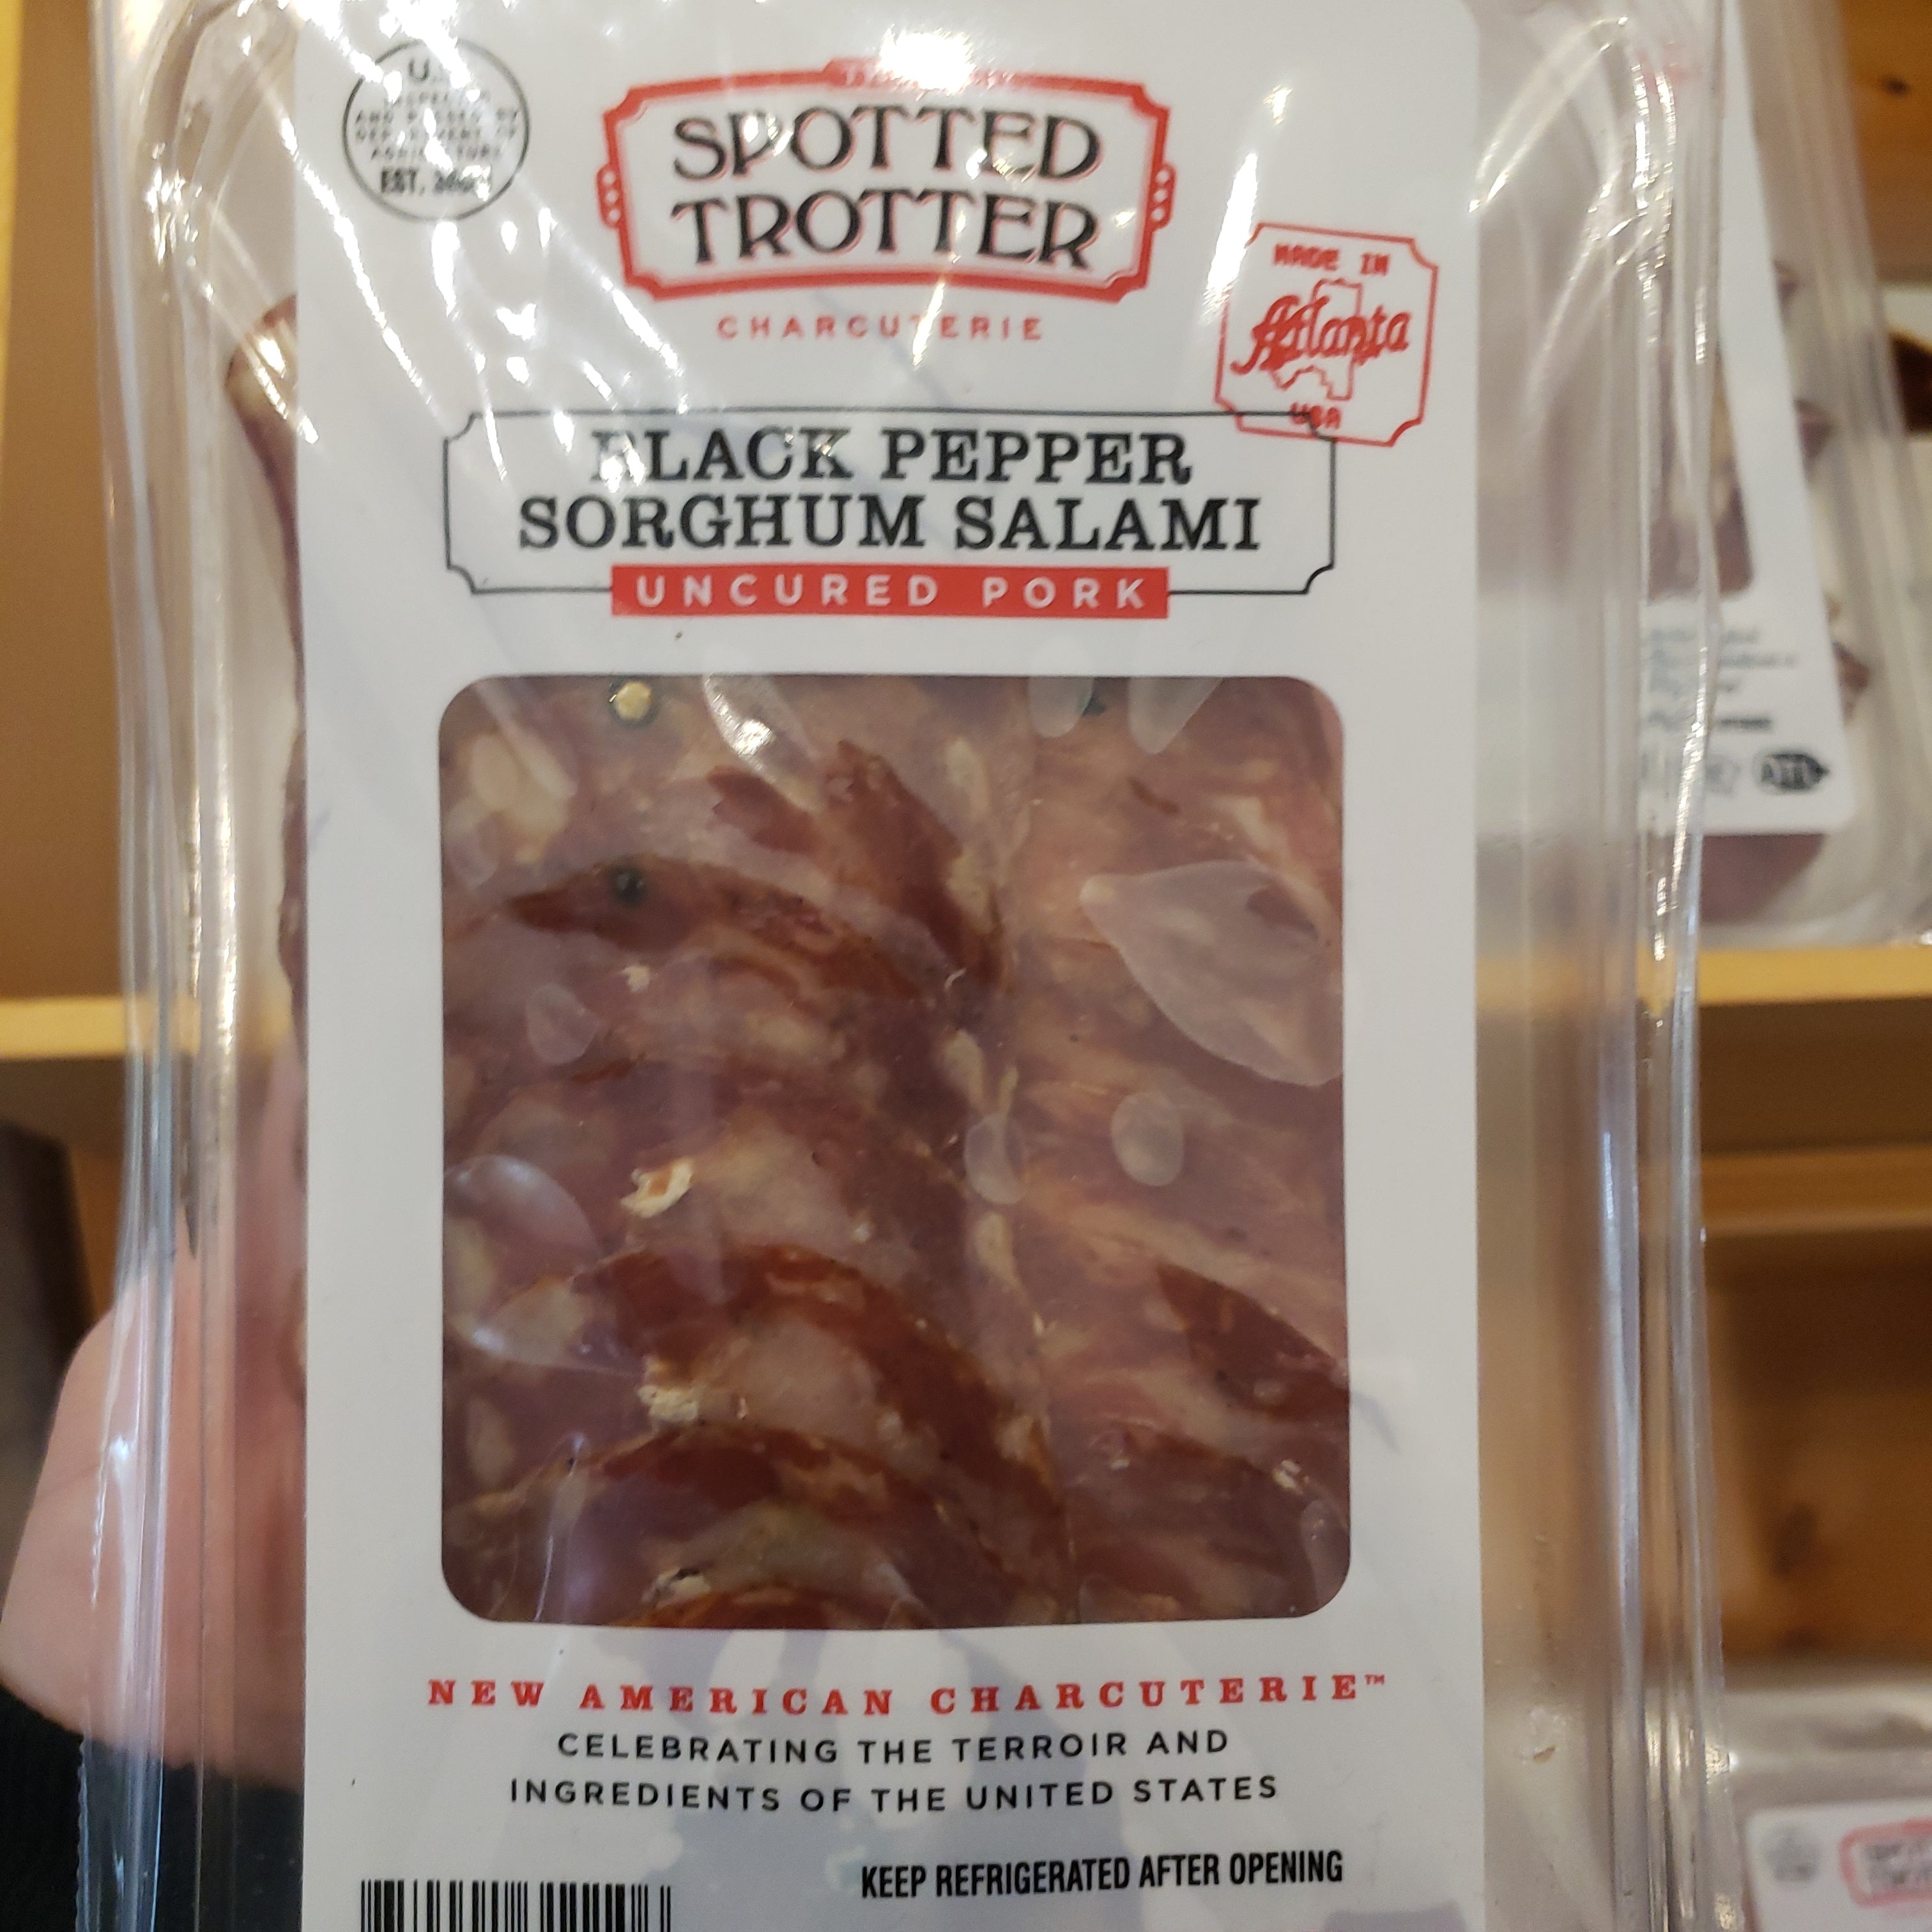 Spotted Trotter packaged charcuterie